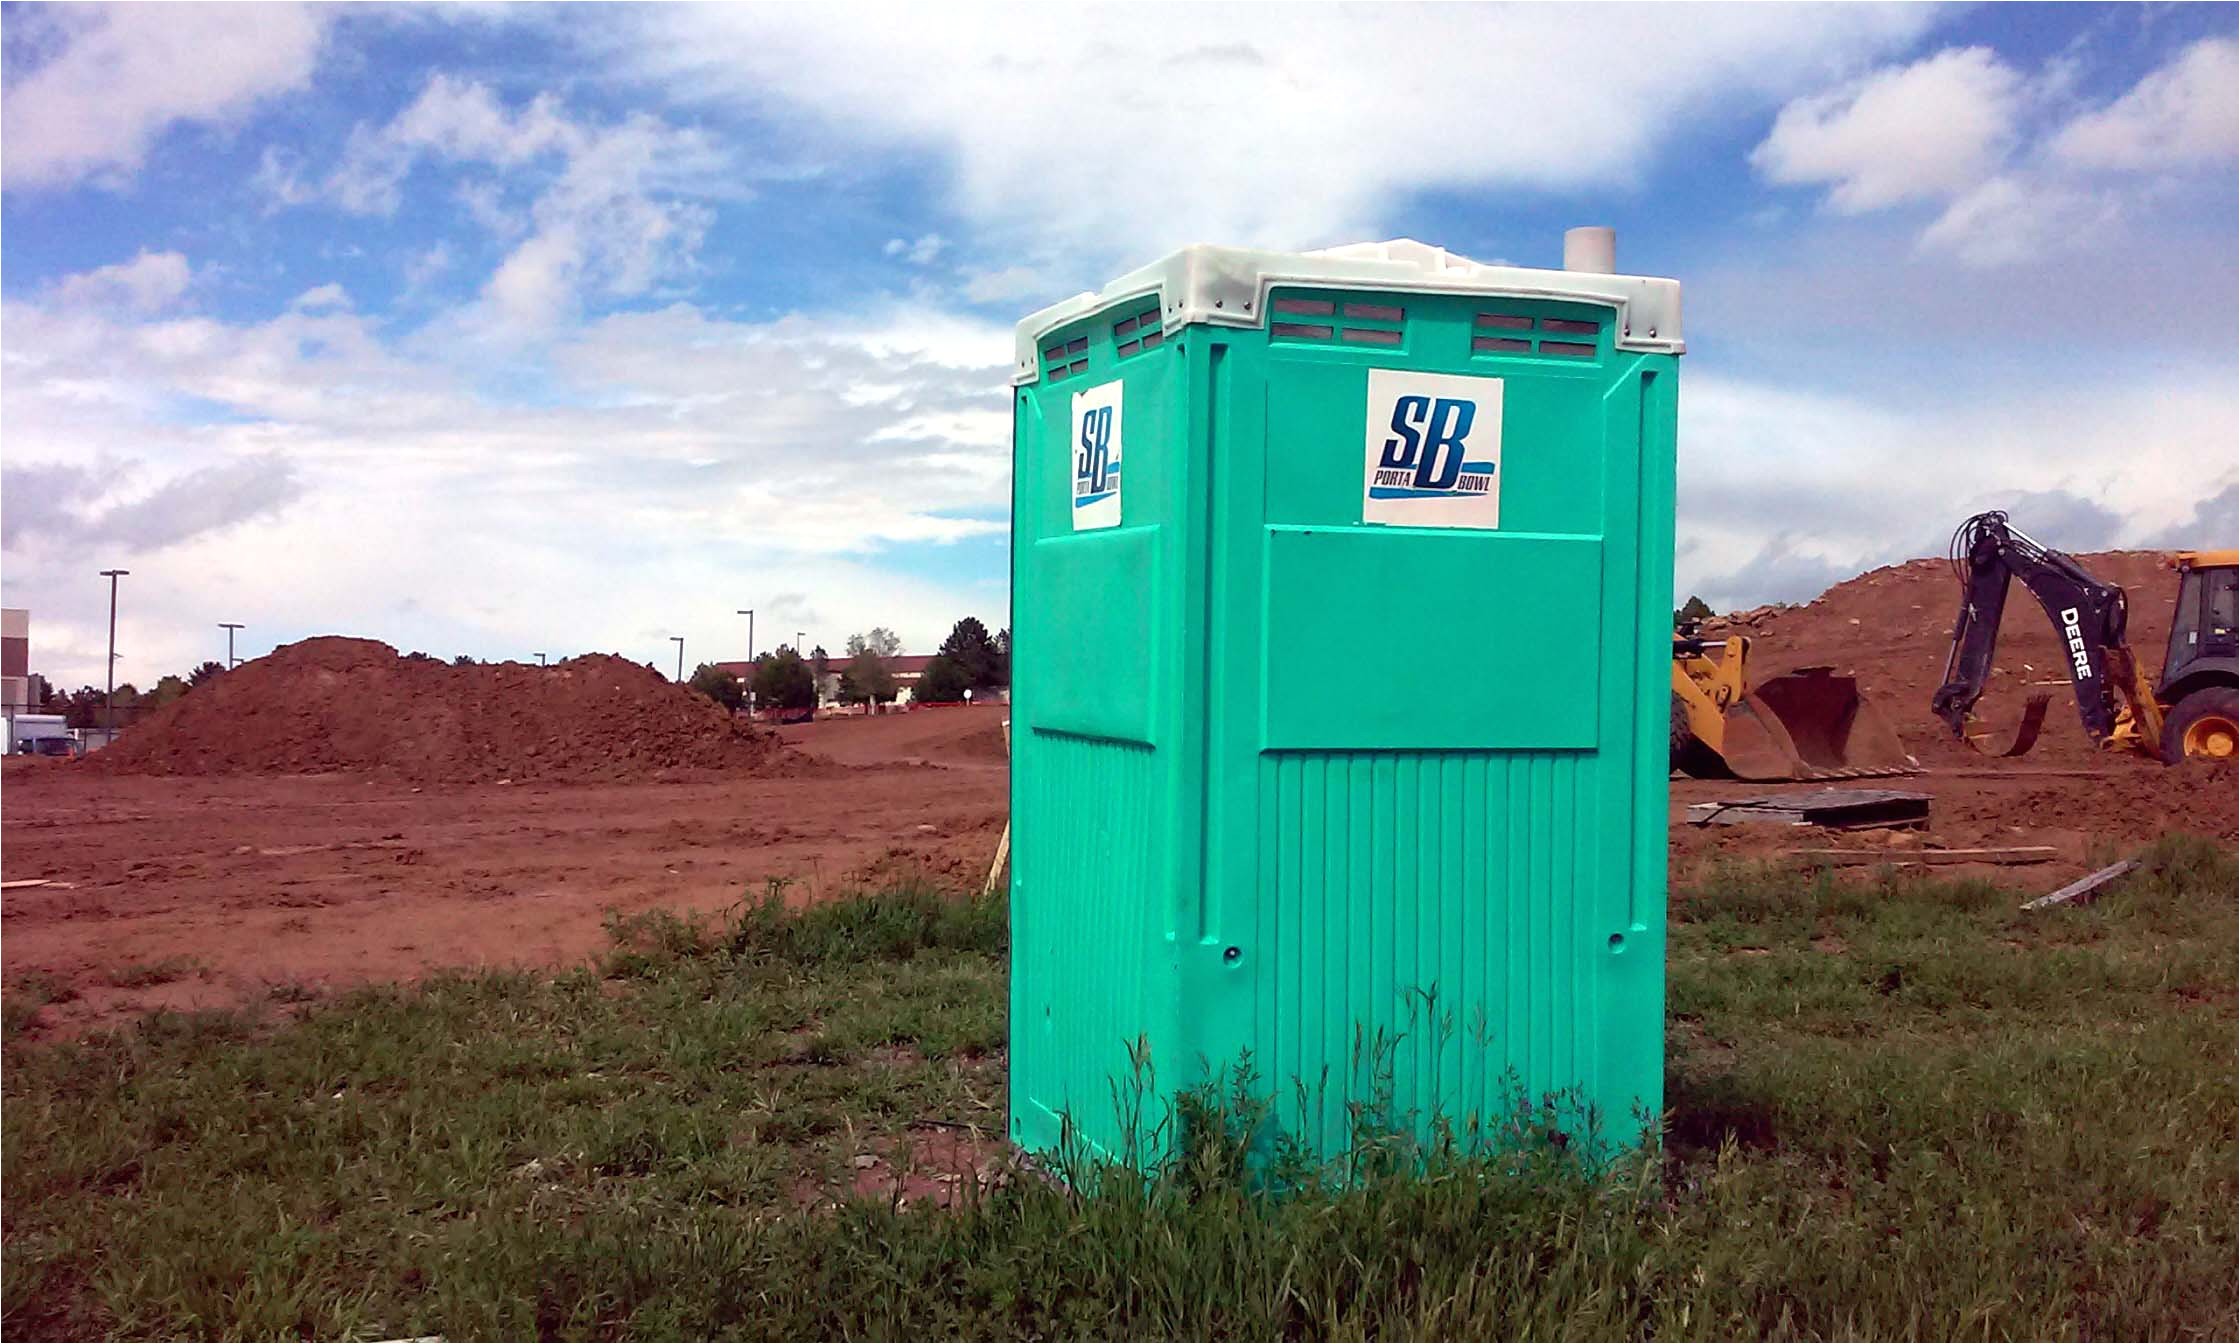 colorado porta potty rental covers portable toilet rental for event toilets construction site portable toilets and restroom trailers 959353